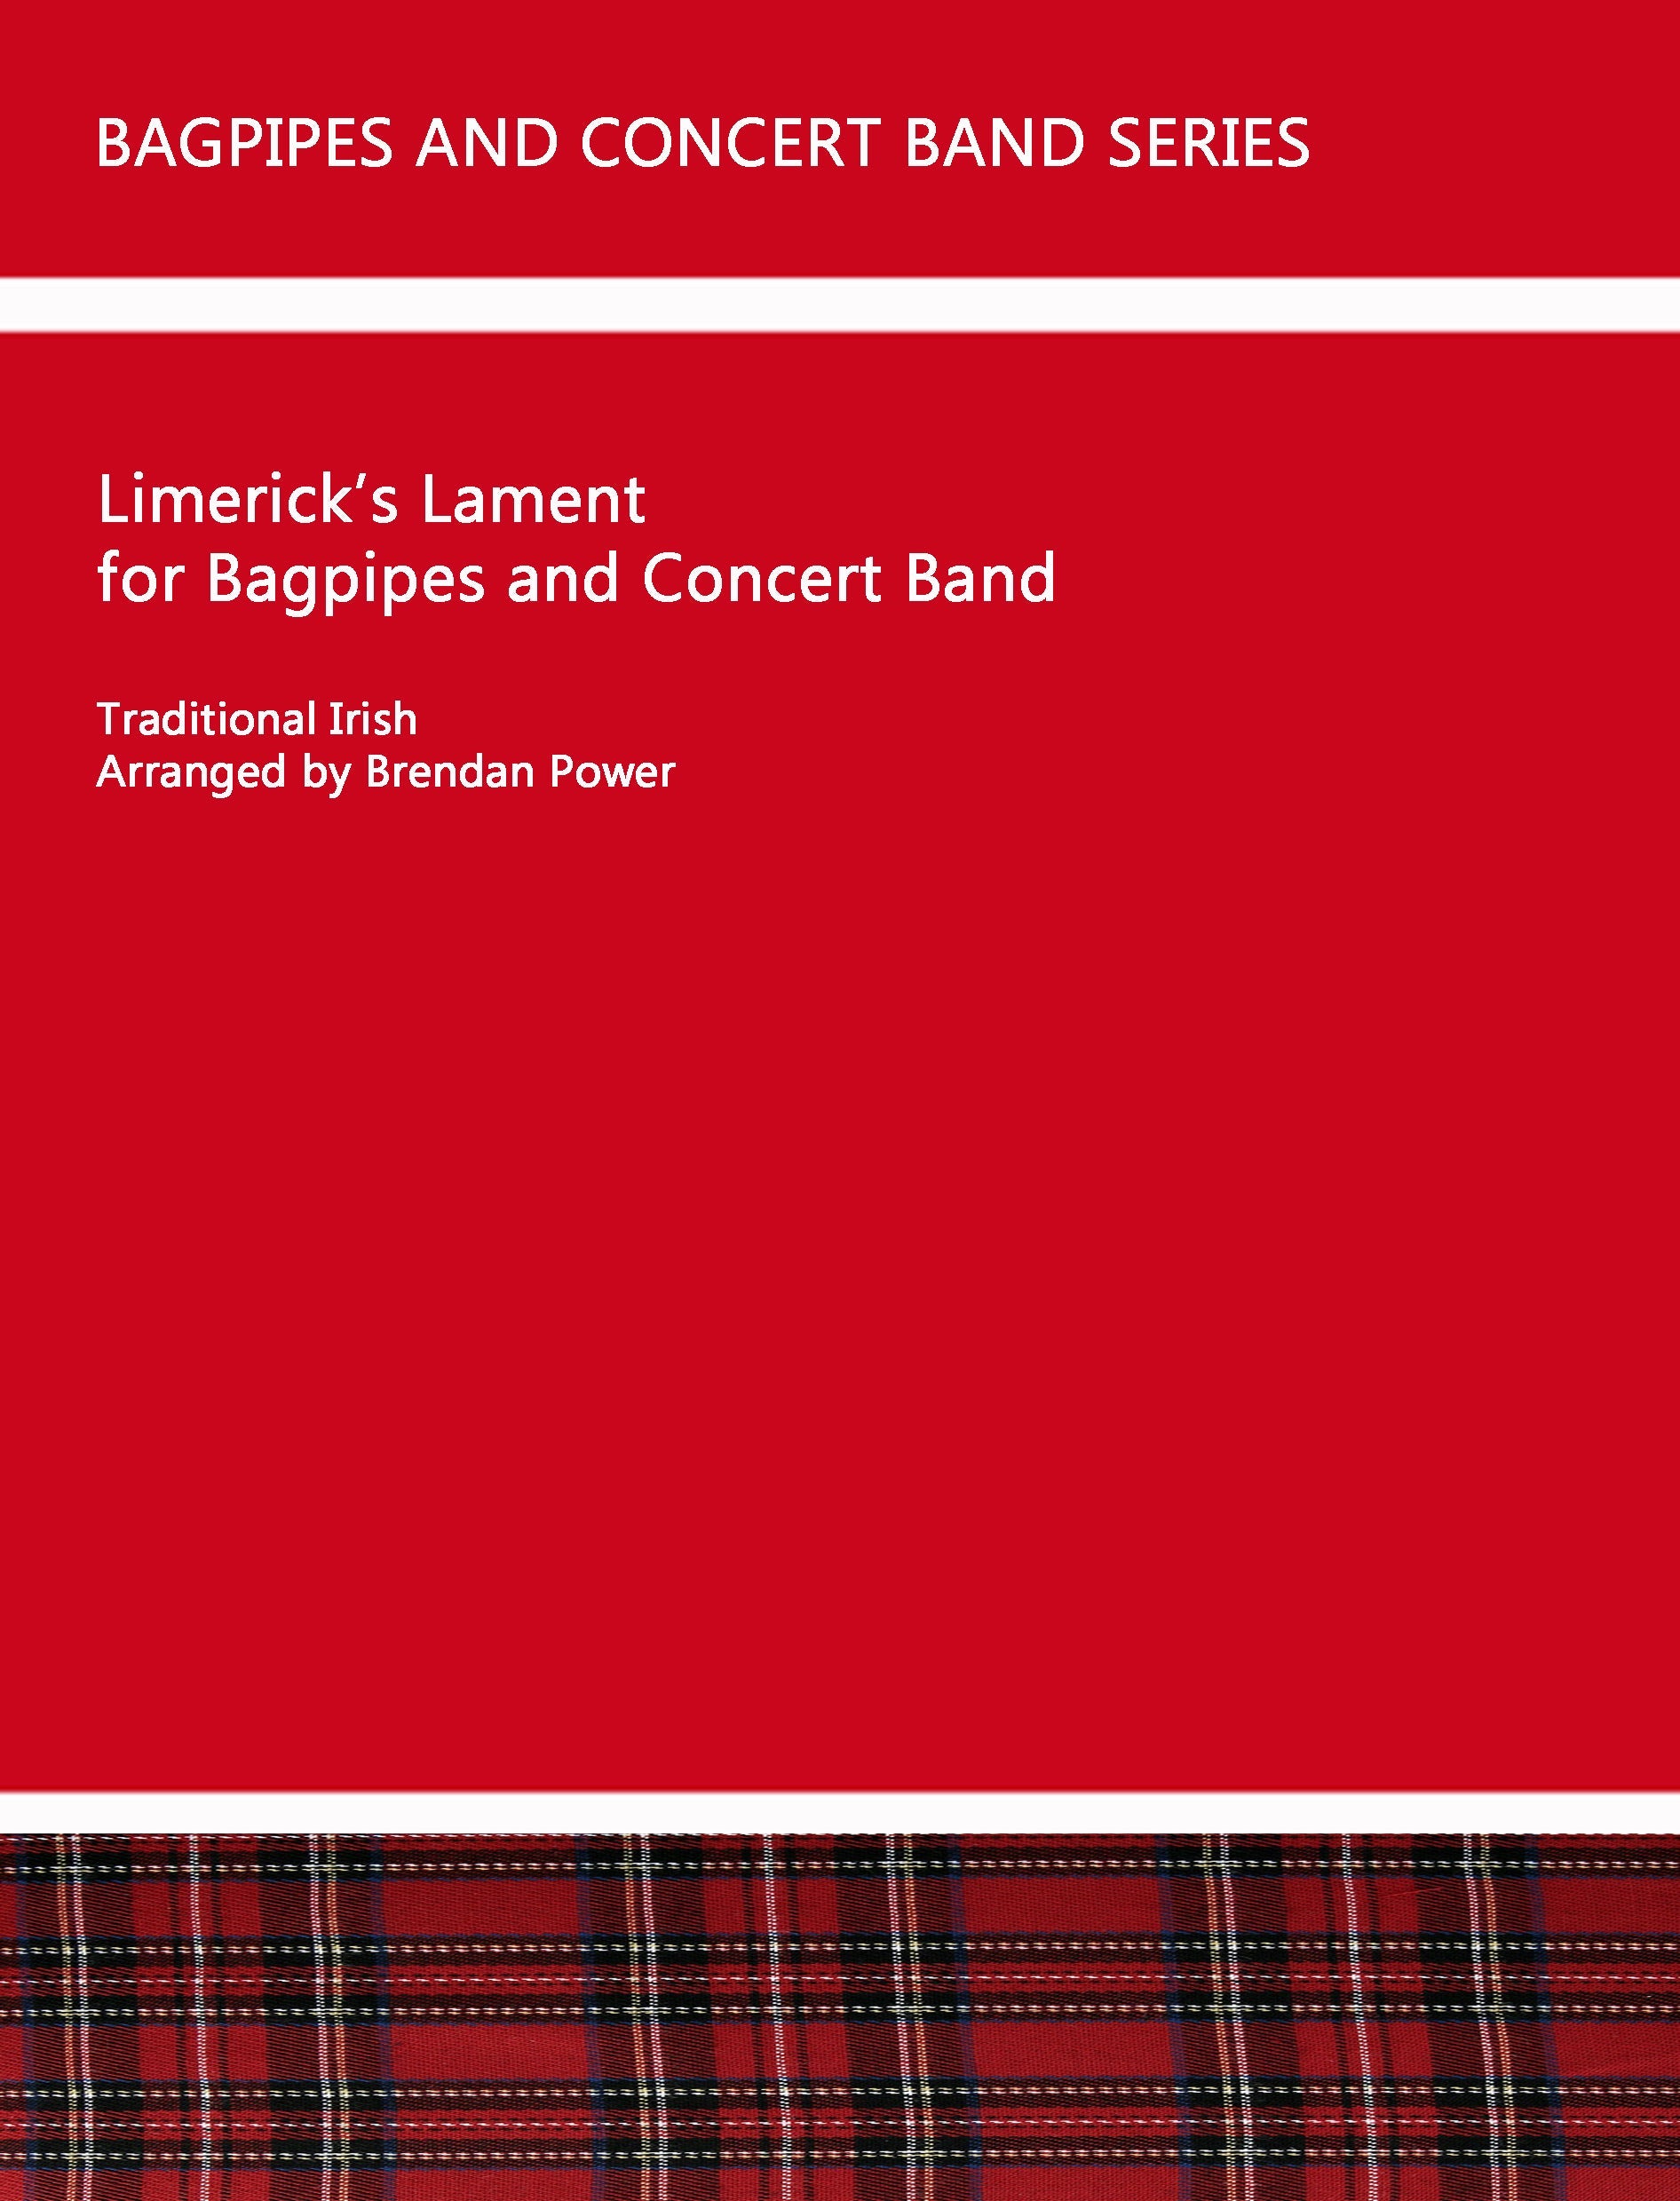 limerick-s-lament-for-concert-band-bagpipes-sheet-music